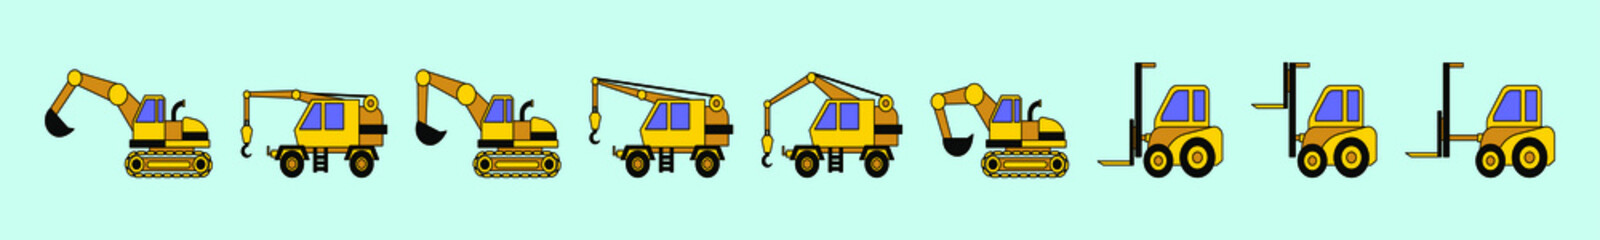 Mini loader flat style. Commercial Vehicles. Special equipment. Vector illustration isolated on blue background